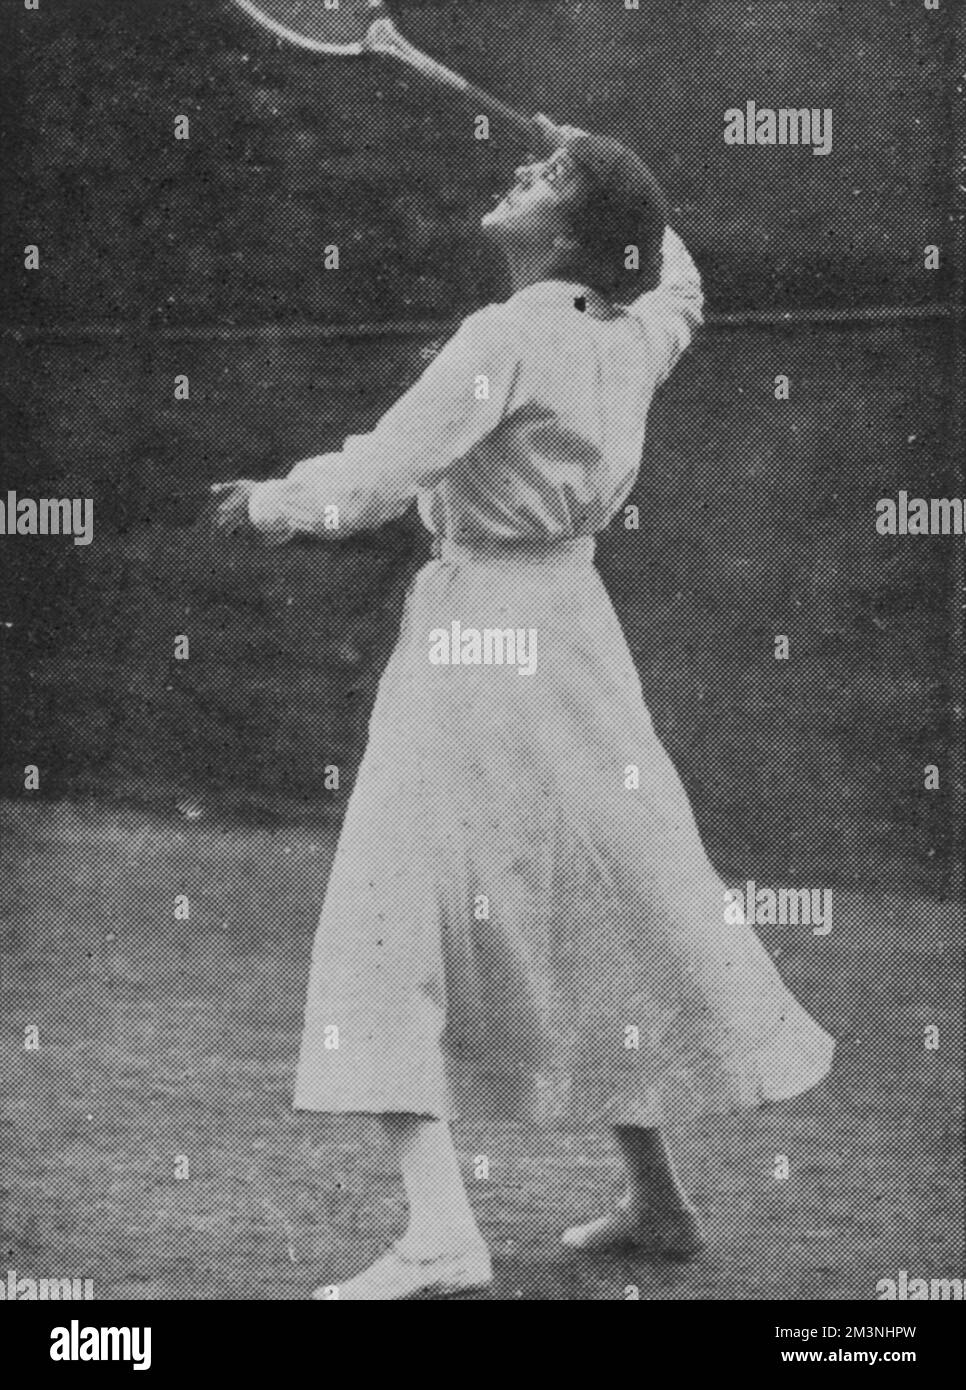 Dorothea Douglass Lambert Chambers (1878 - 1960), English tennis player and seven time winner of the ladies' singles title at Wimbledon between 1903 and 1914.  Pictured here in 1919 when she was beaten by Suzanne Lenglen in the final.  1913 Stock Photo